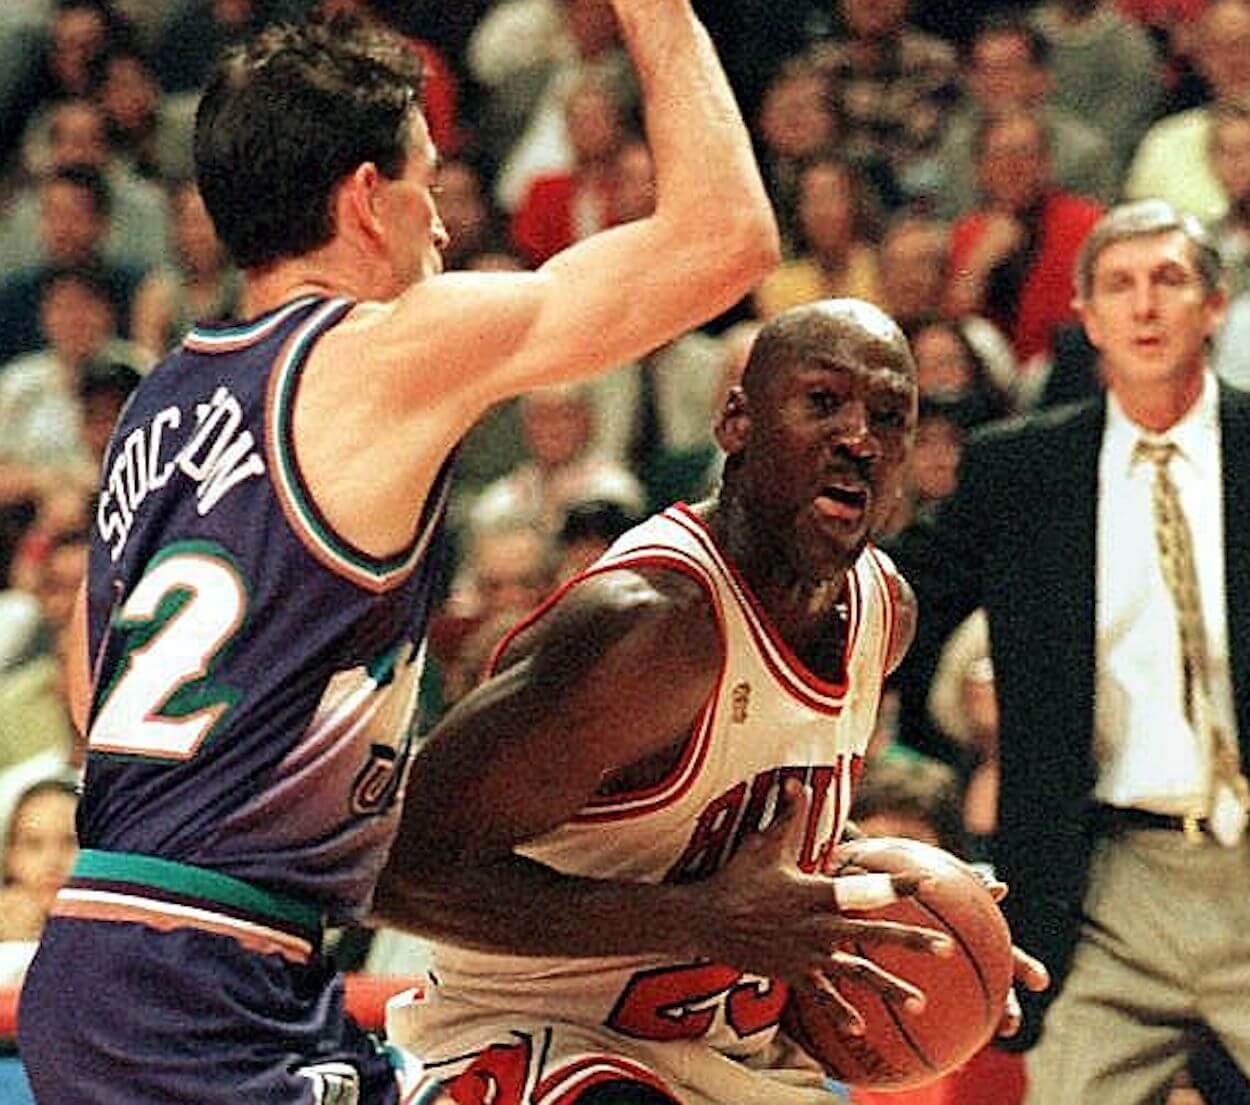 Michael Jordan Apparently Took Offense to Being Guarded by a 'White Guy